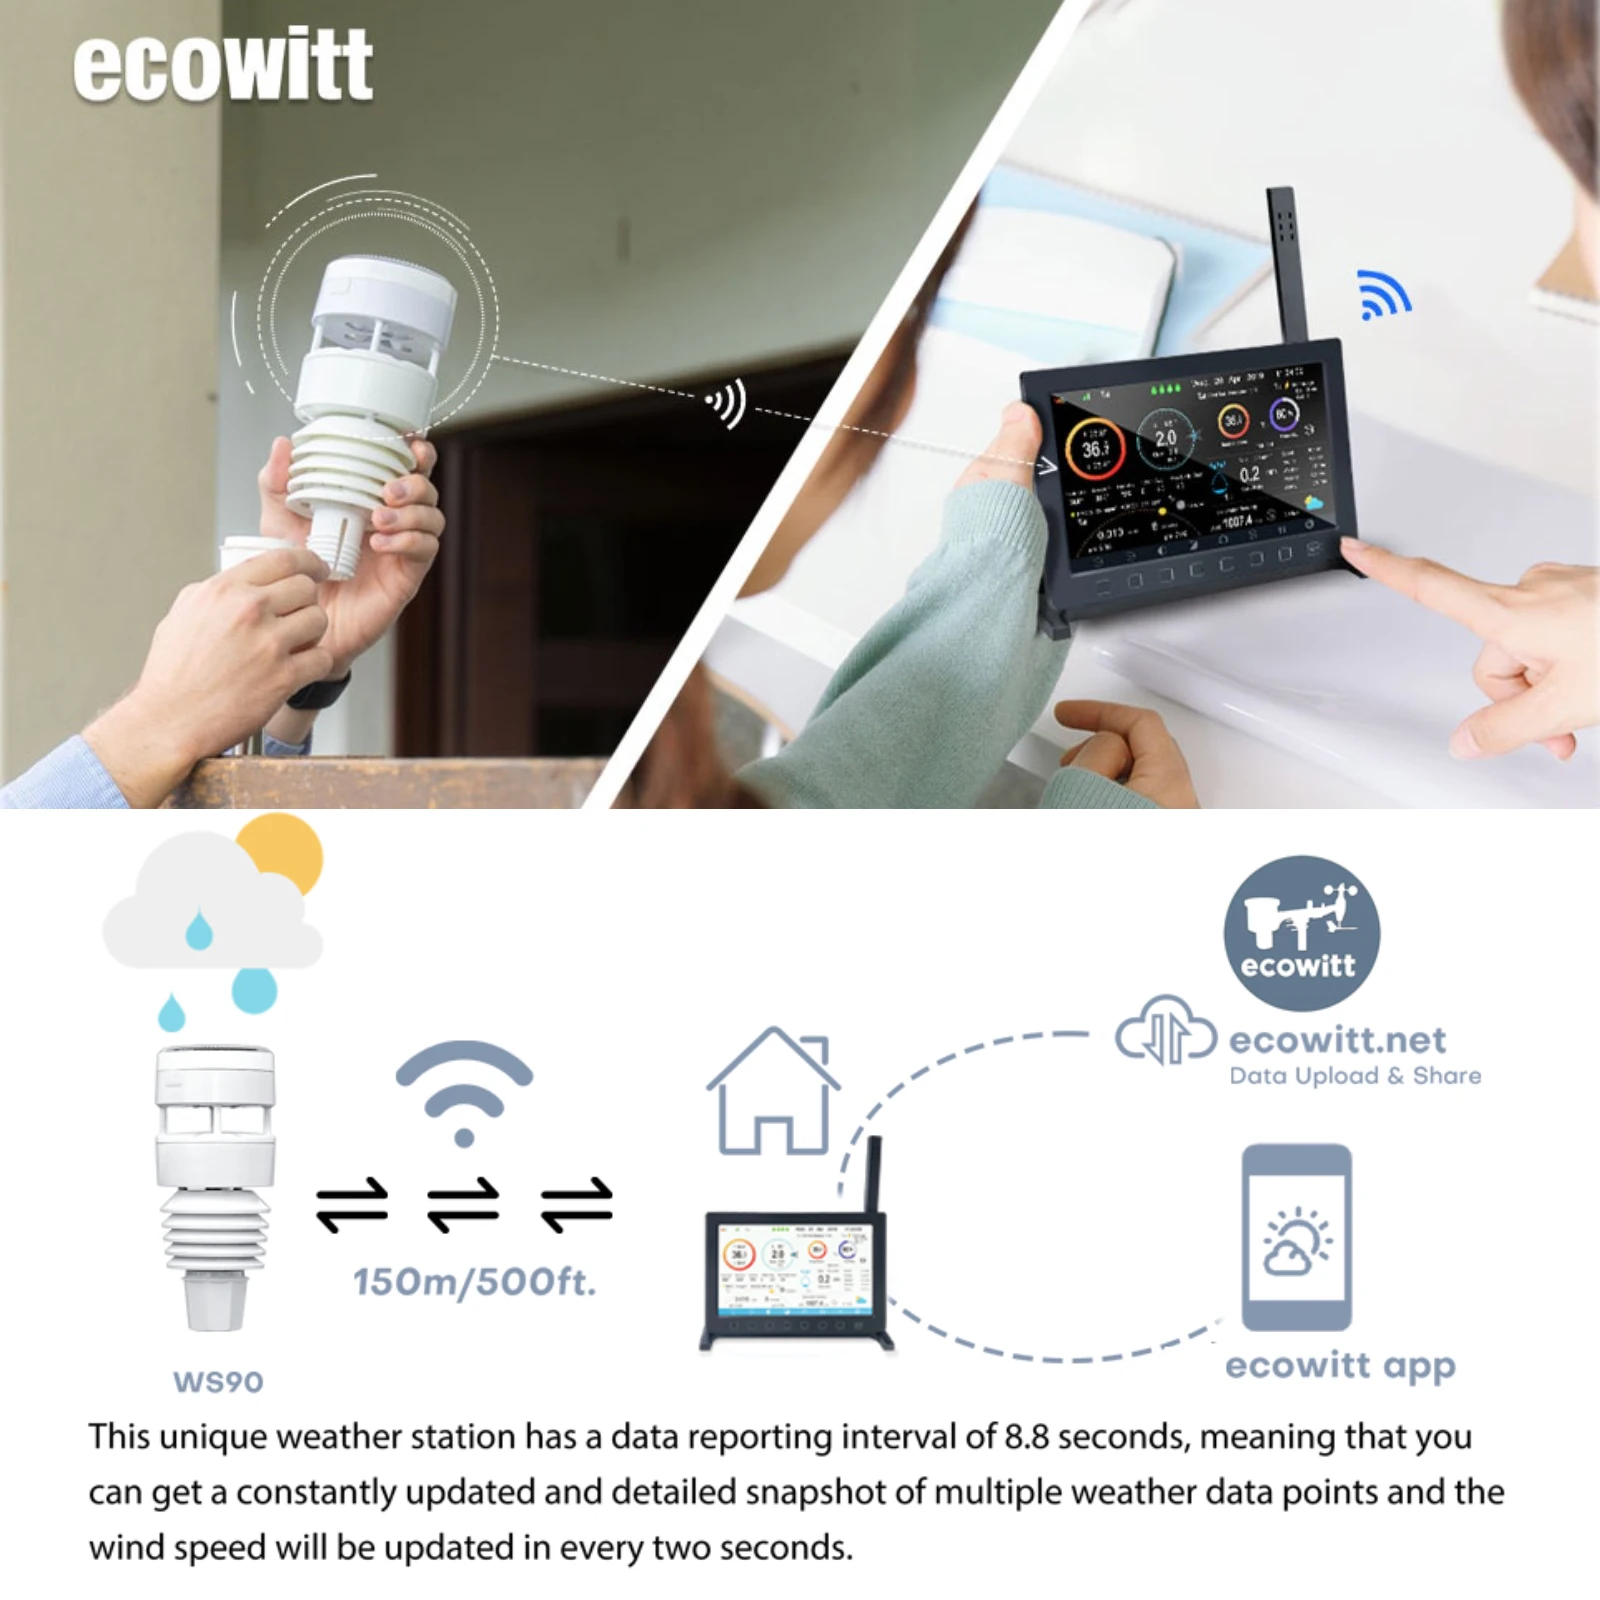 Ecowitt HP2564 Wittboy Pro Weather Station, Includes HP2560_C TFT